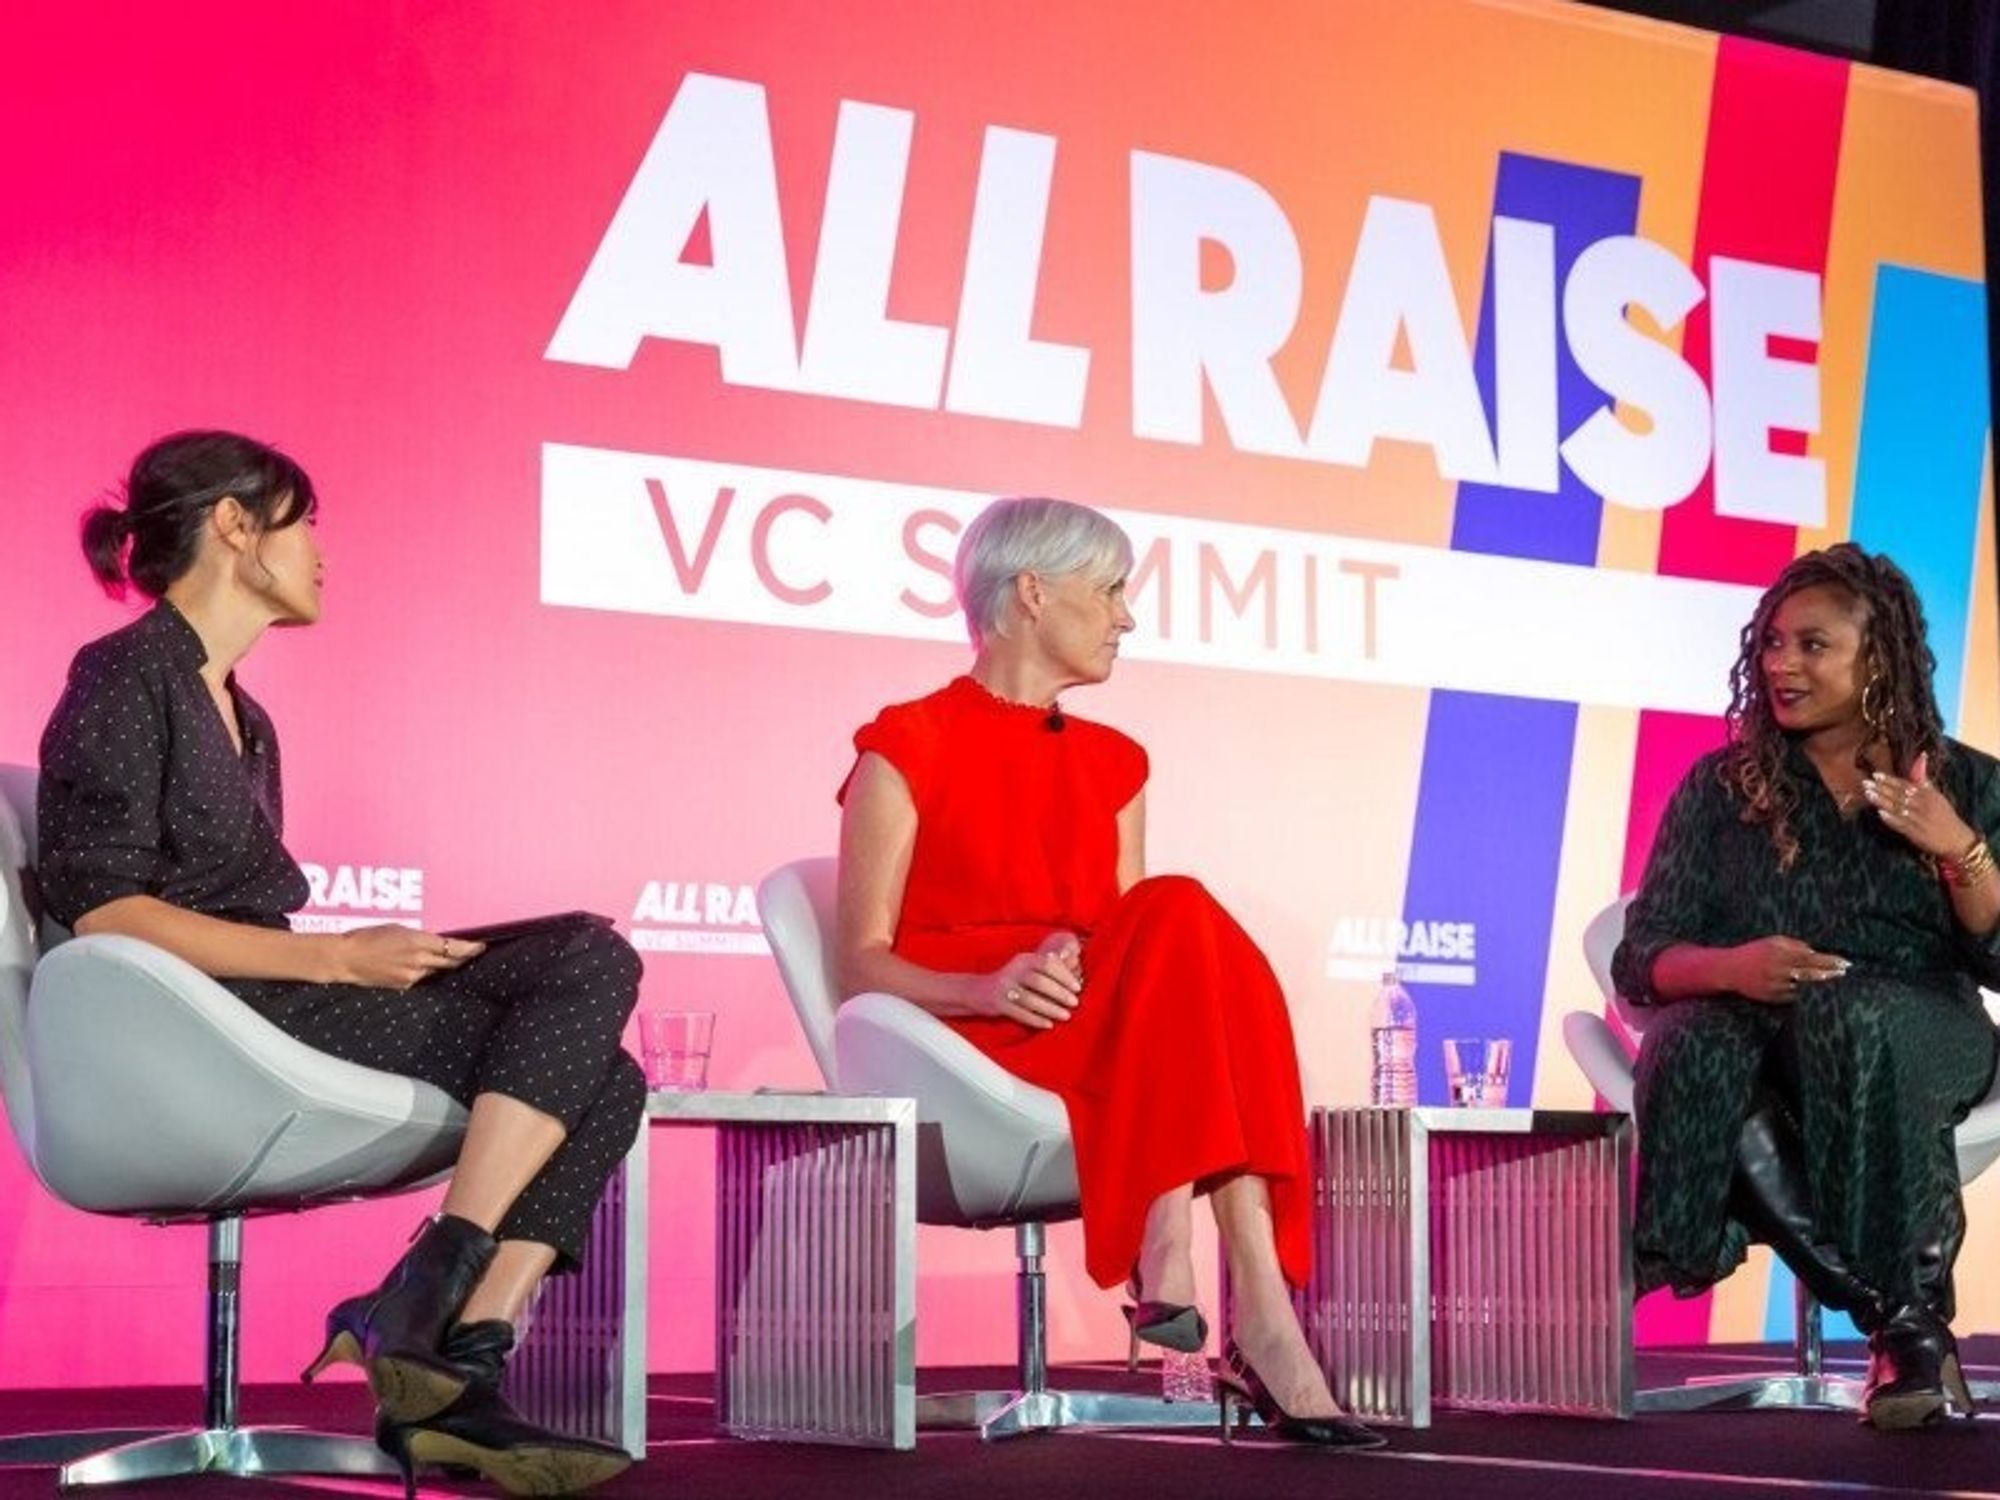 Tired of 'Manels'? All Raise's Database of Female, Non-Binary Speakers Hopes to Improve Tech & VC Panels